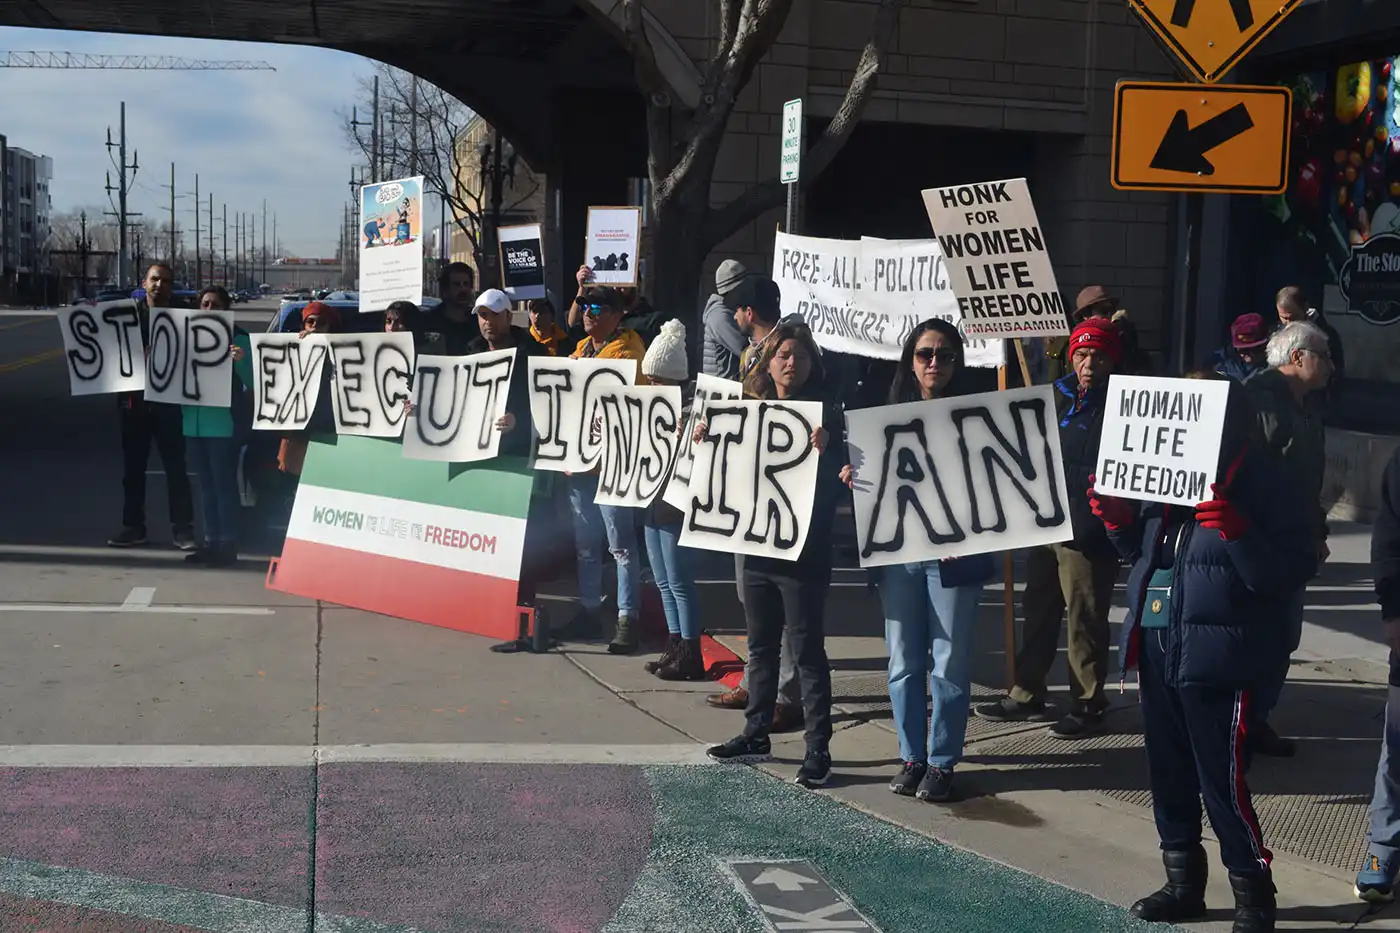 Free Iran SLC is a collective of activists working to raise awareness about the movement toward an egalitarian Iran.